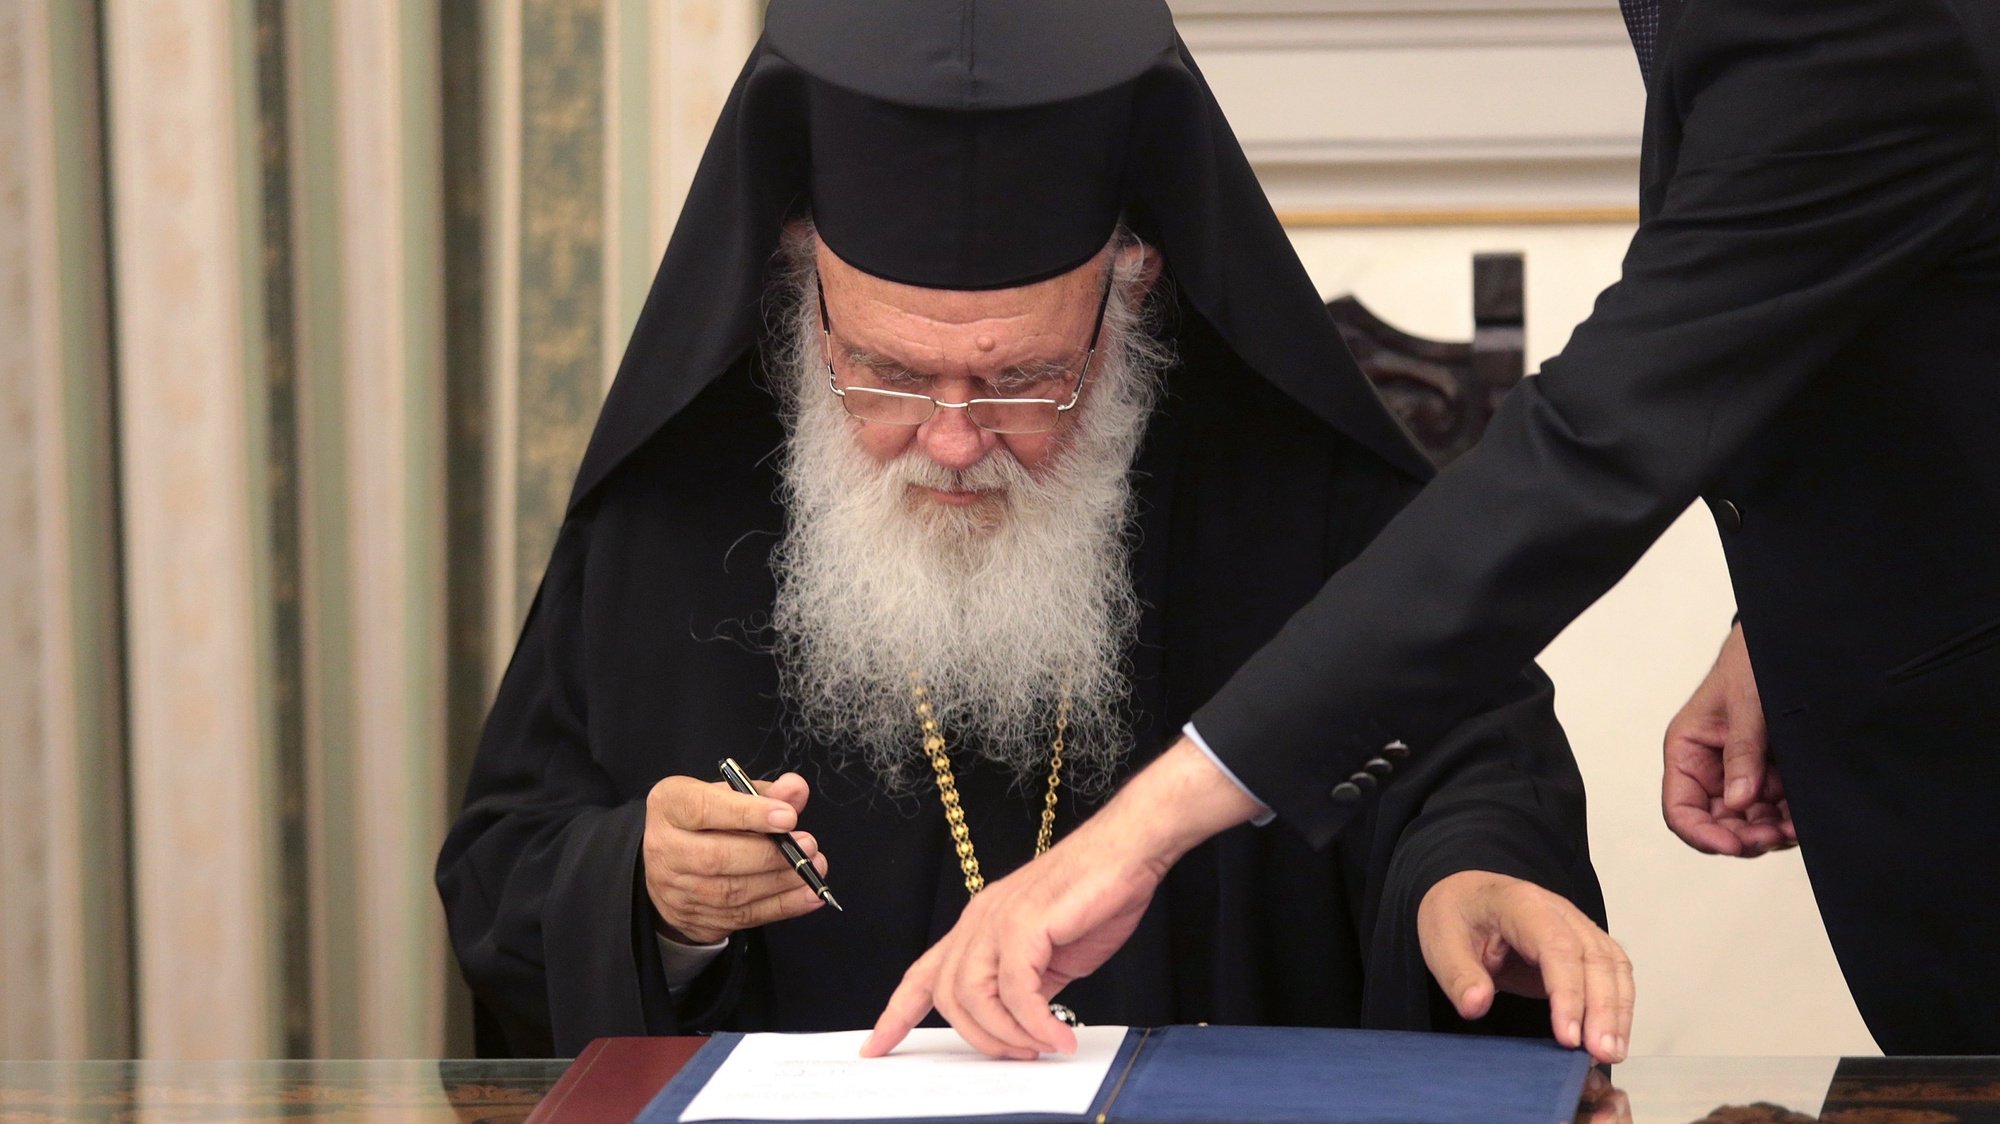 epa07703346 Greek Archbishop Ieronymos II signs documents following the swearing-in ceremony of New Democracy President Kyriakos Mitsotakis (not pictured) at the presidential palace in Athens, Greece, 08 July 2019. The center-right New Democracy party won general elections in Greece on 07 July and will form a majority government. A total of six parties will enter parliament based on the results. Voter participation reached 57.92 percent.  EPA/PANTELIS SAITAS